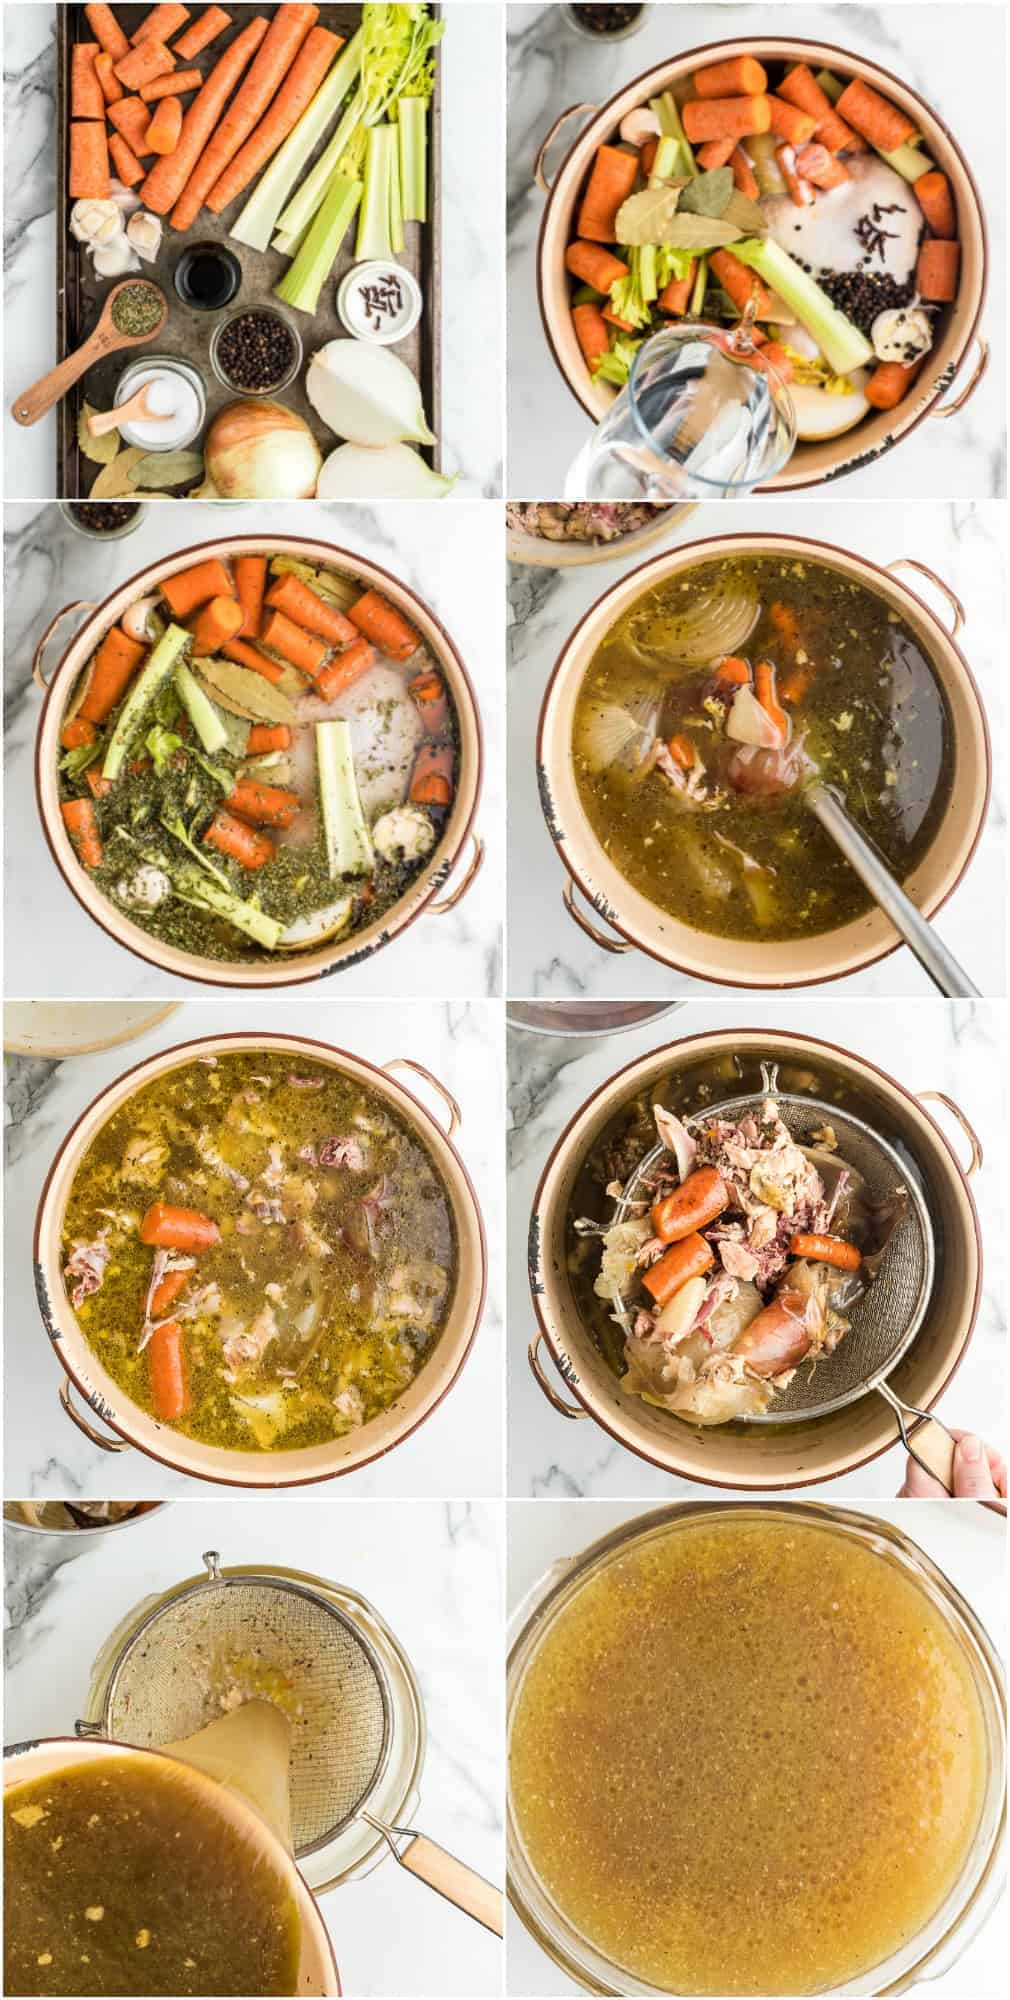 how to make chicken broth step by step photo instructions 